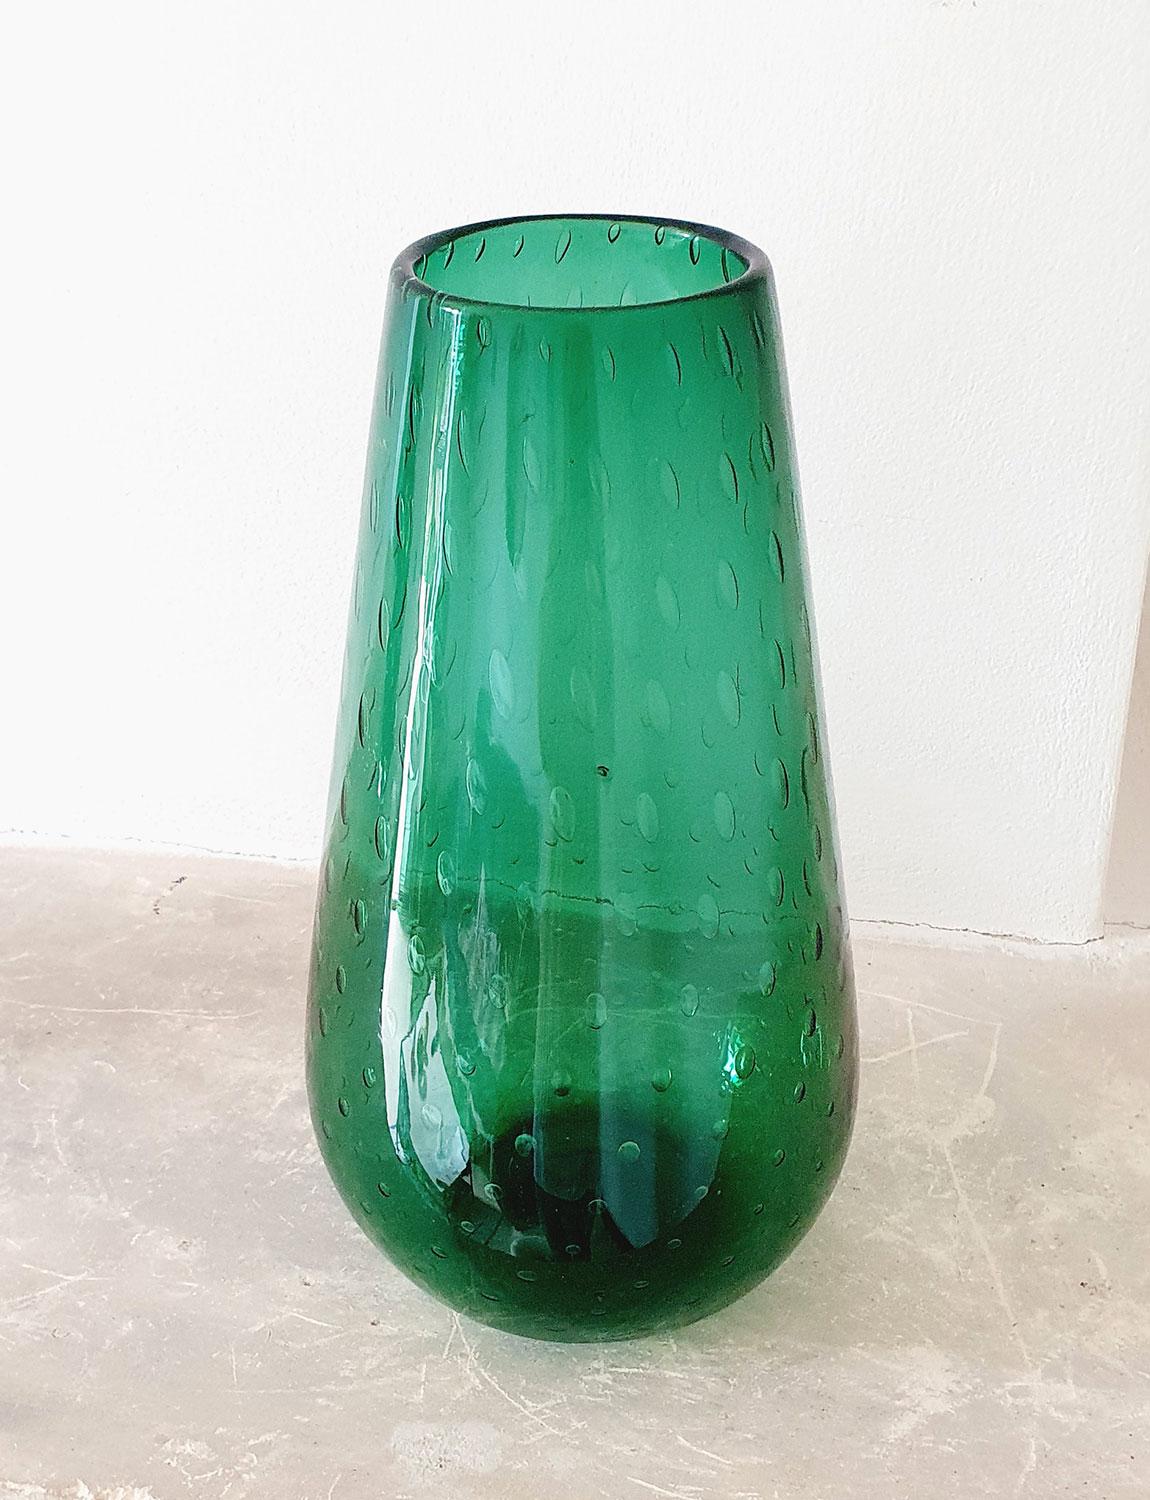 1970s Elegant Italian dark green hand blown vase with bolle (bubbles) throughout. There is the mark on the base where the molten glass has been cut from the blow pipe evidencing it's hand blown nature. In good condition and found here in Italy.